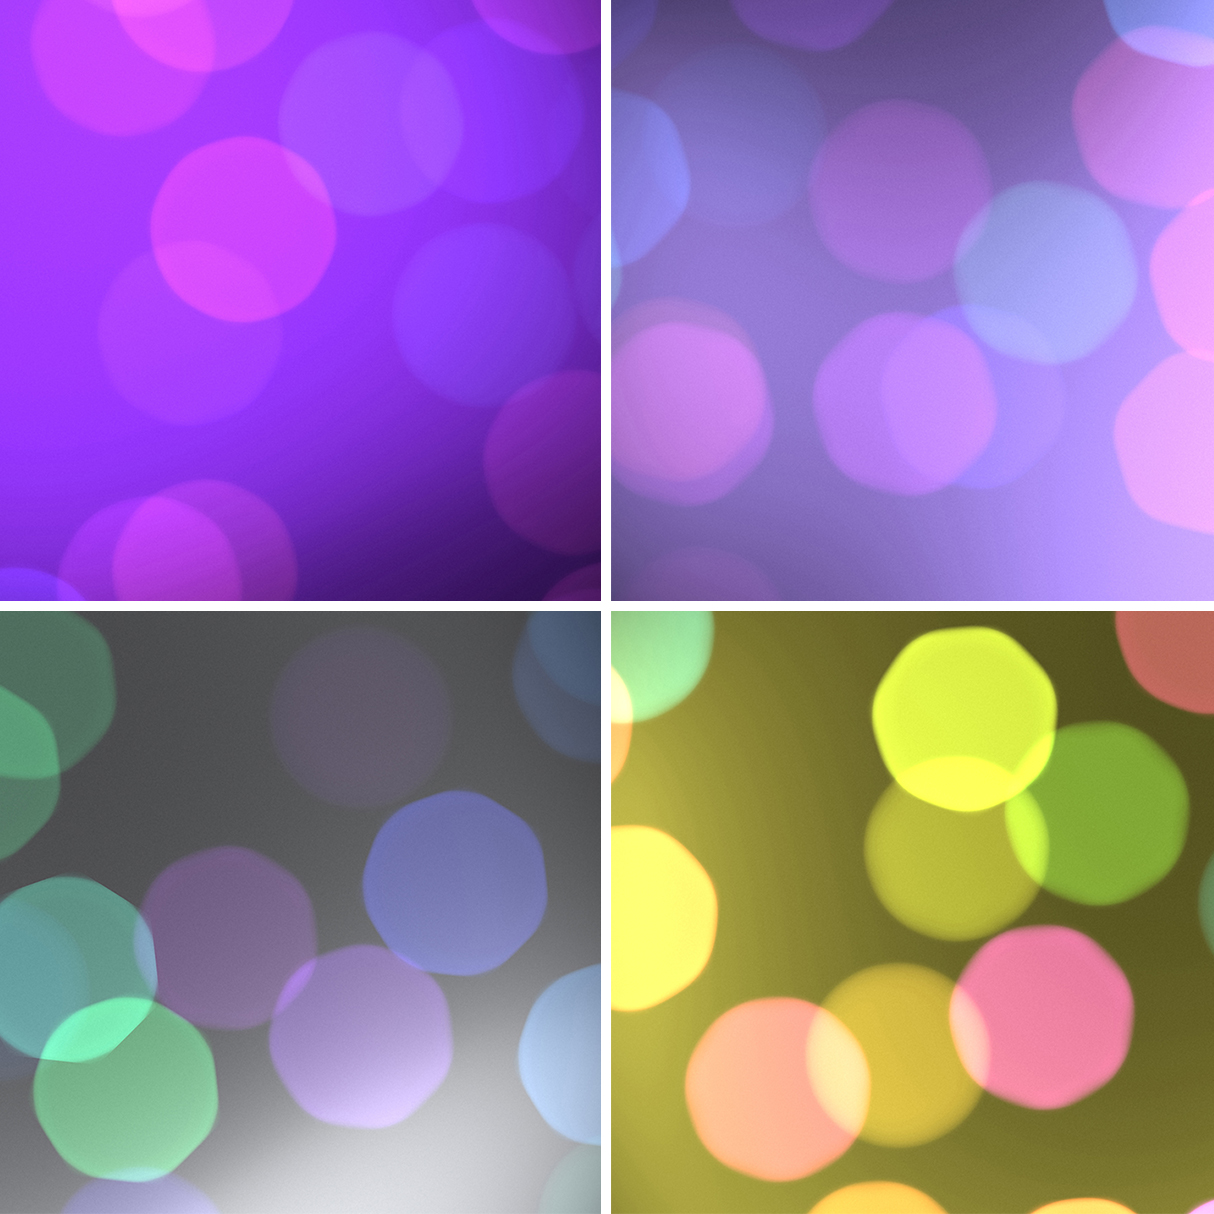 50 Bokeh Pro Backgrounds Samples Preview – Part 2